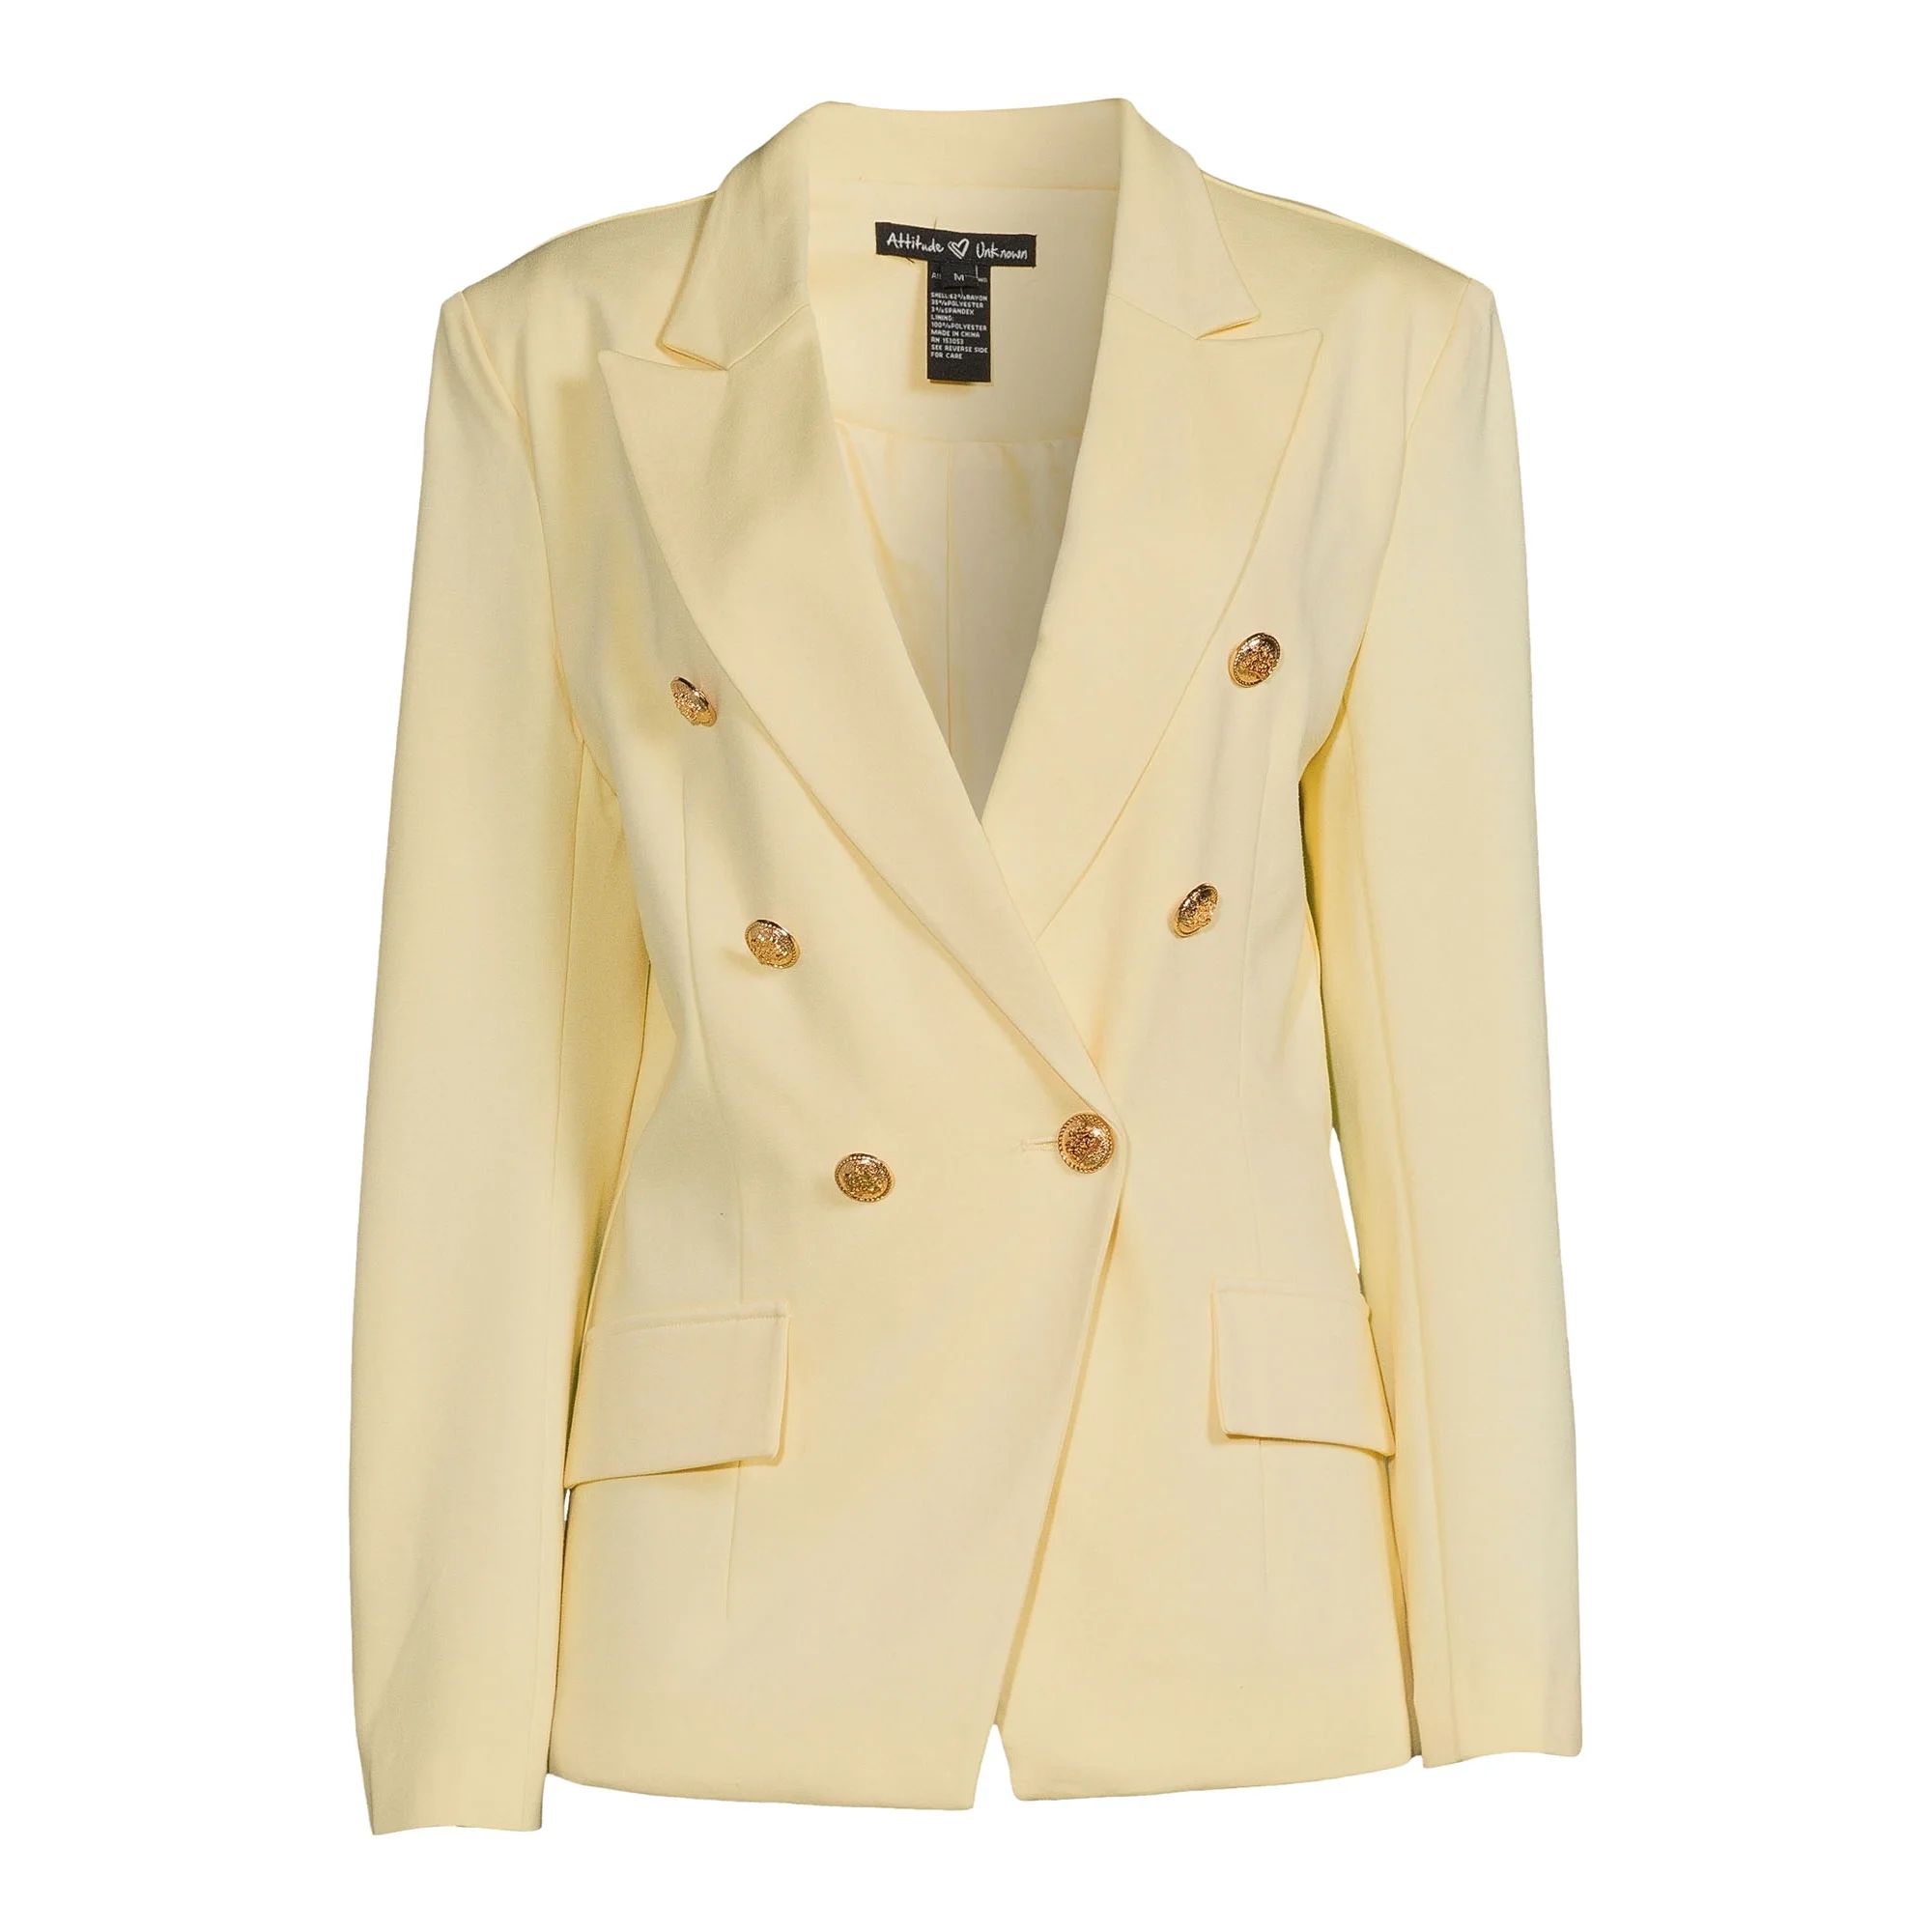 Attitude Unknown Women's and Women's Plus Double Breasted Blazer with Metallic Buttons | Walmart (US)